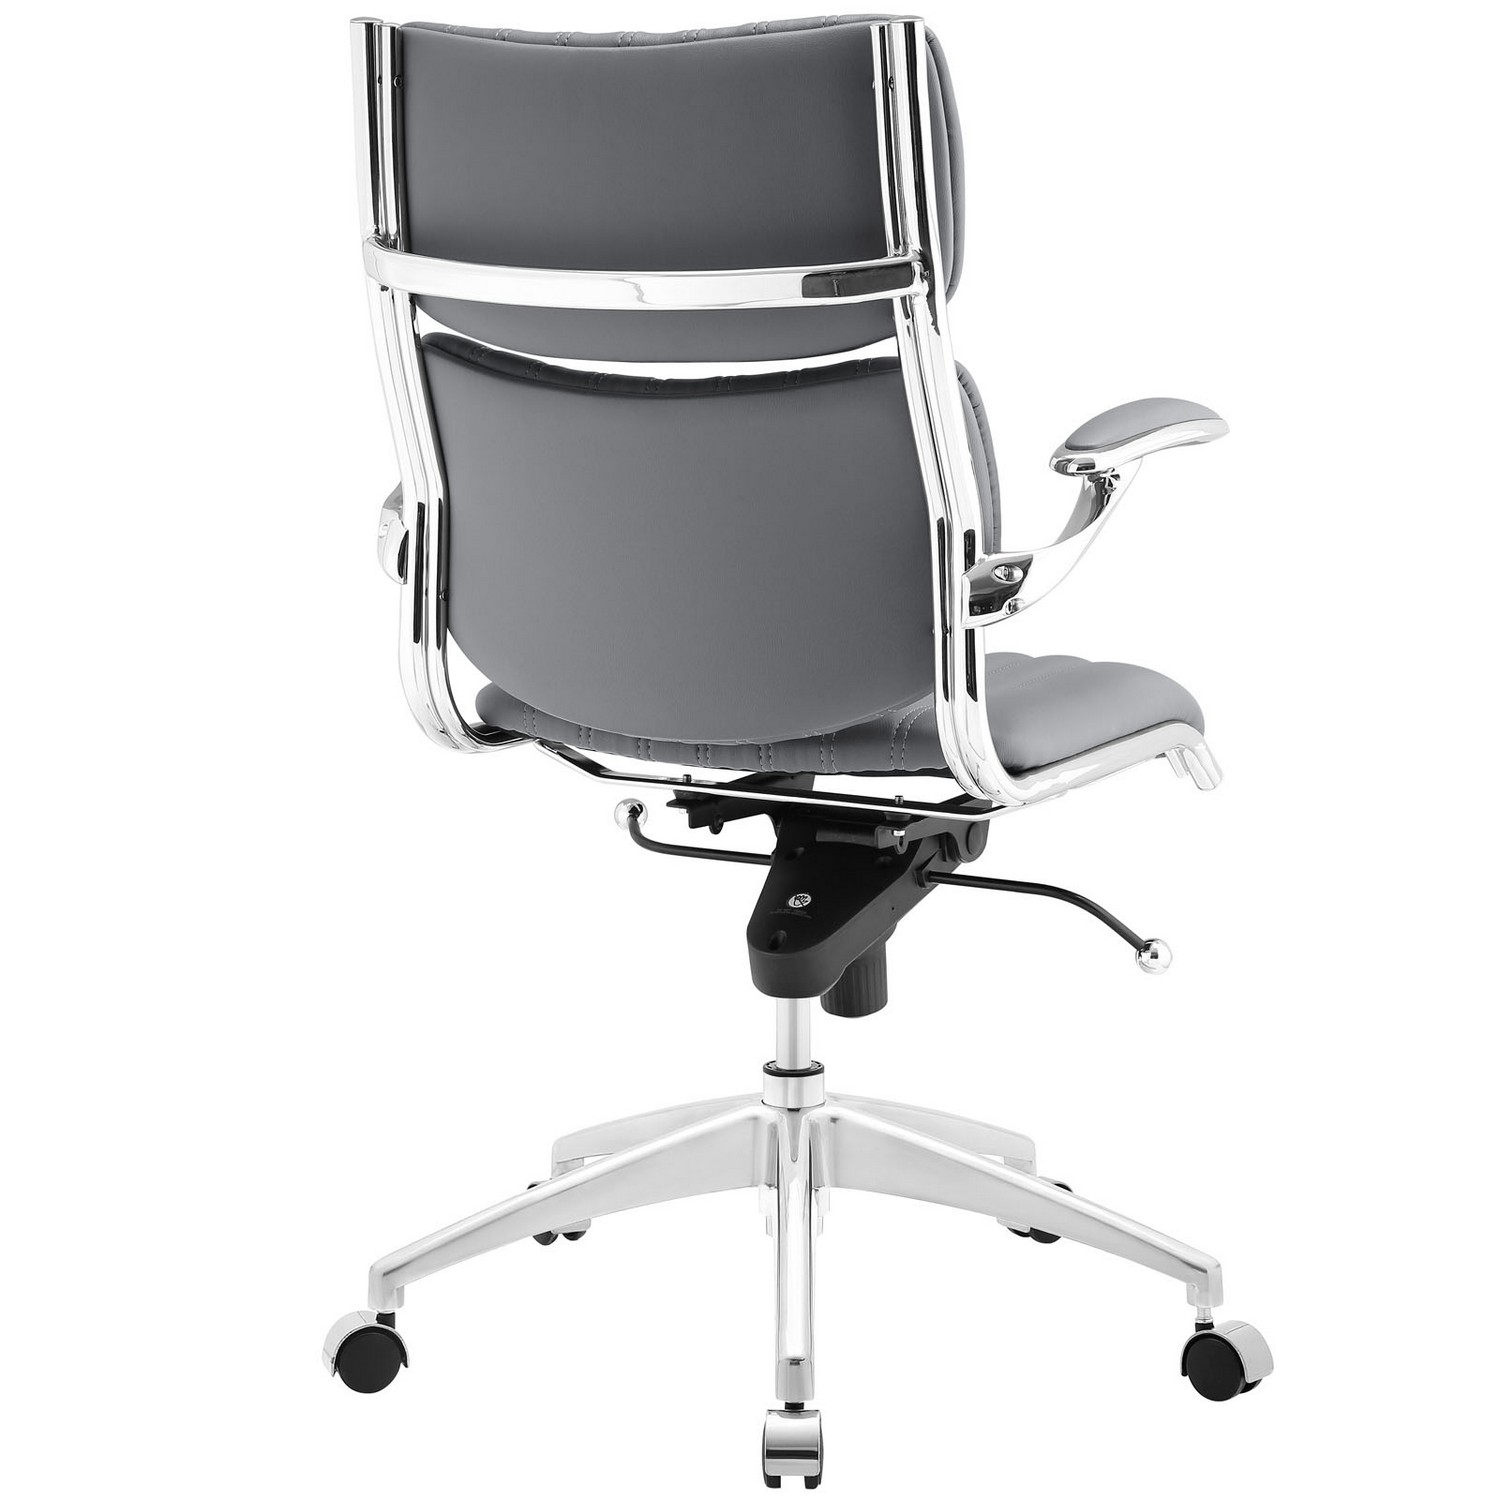 Modway Escape Mid Back Office Chair - Gray